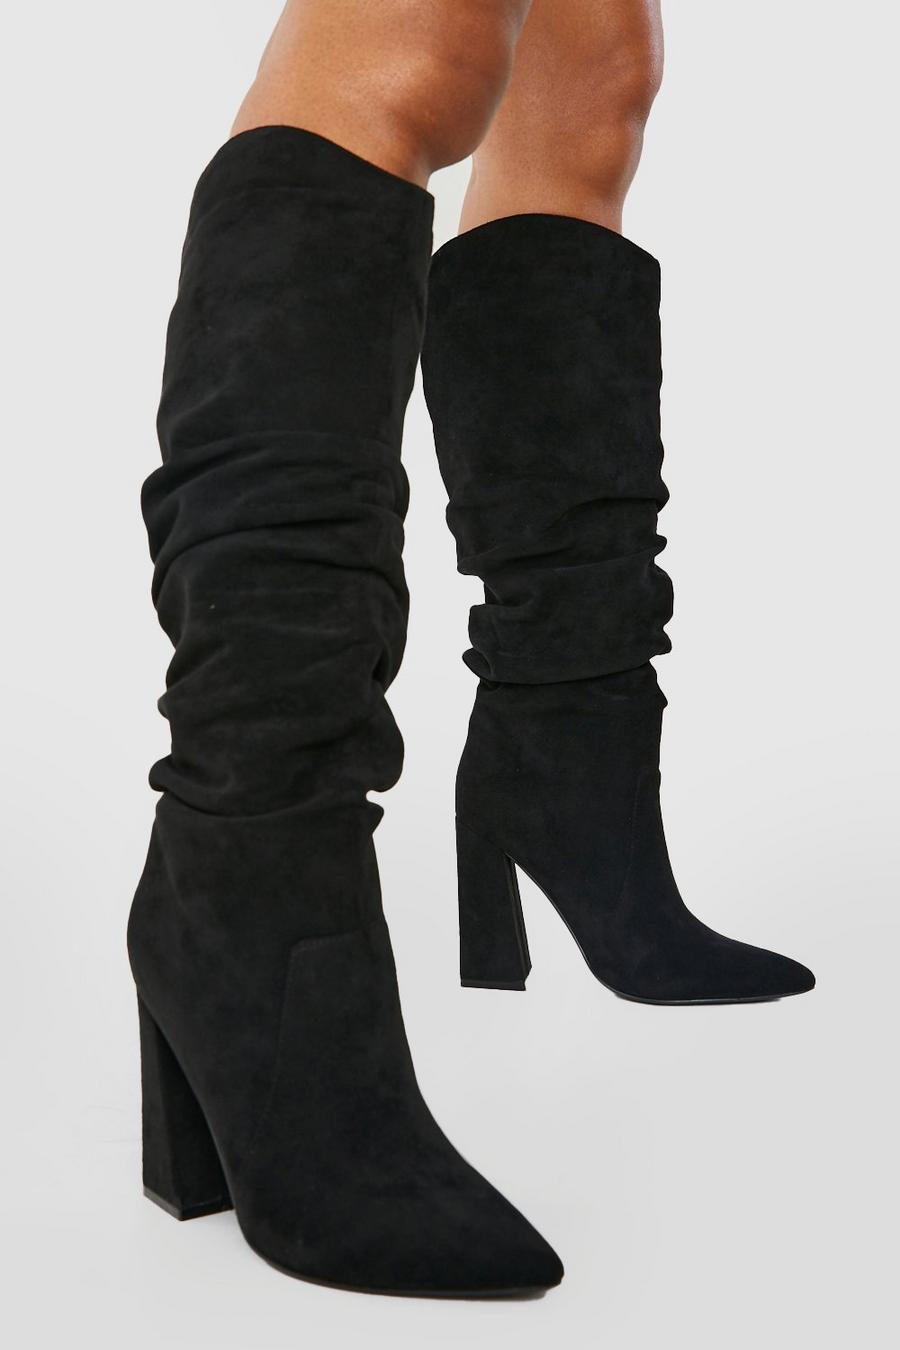 Black Soft Ruched Knee High Pointed Boots